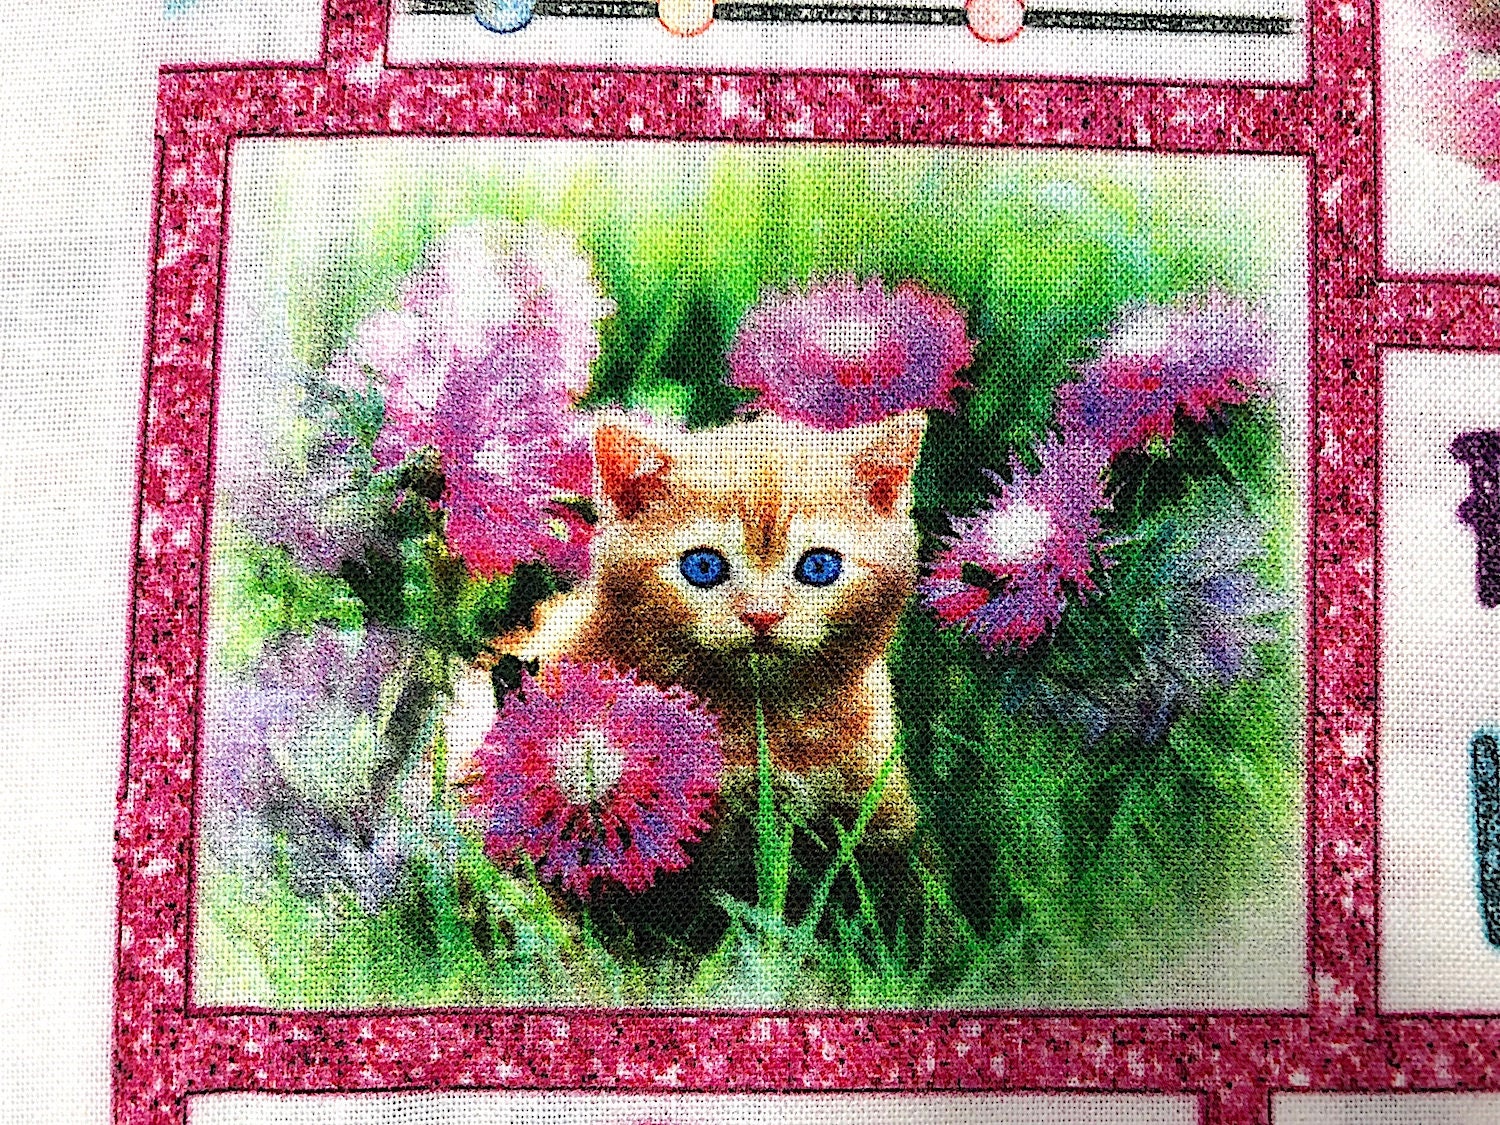 Close up of a beige kitty amongst the flowers and grass.